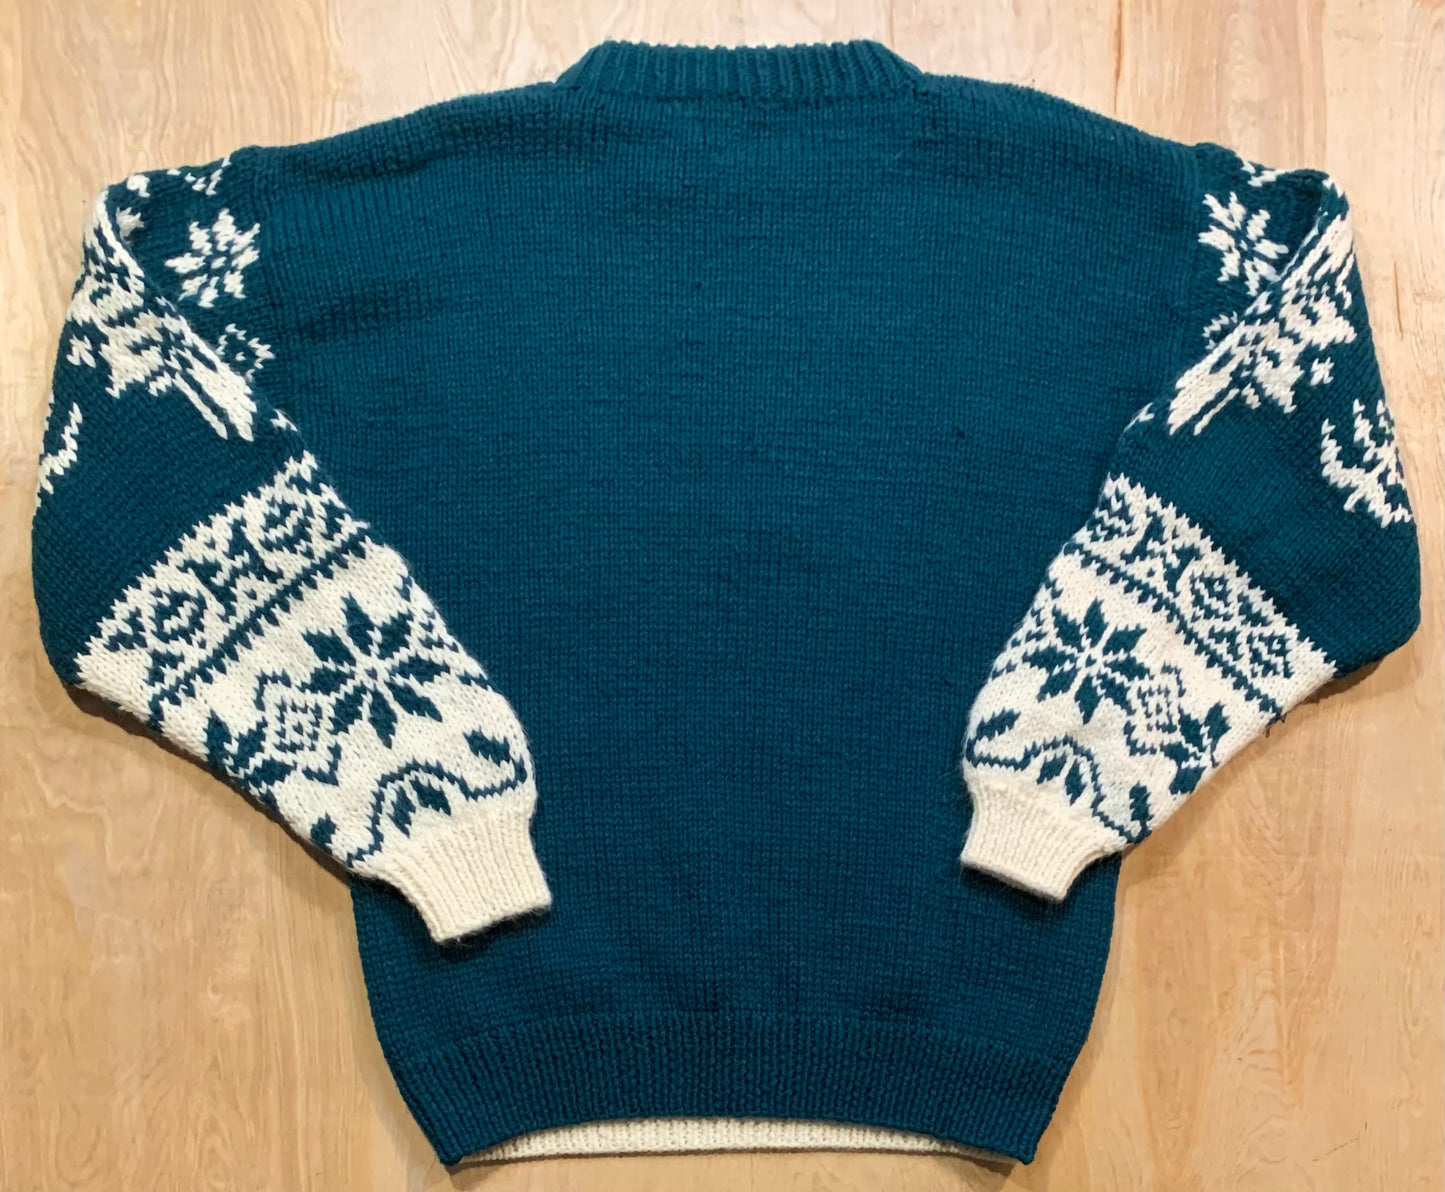 Vintage Hand Knit Reindeer and Snowflakes Holiday Sweater